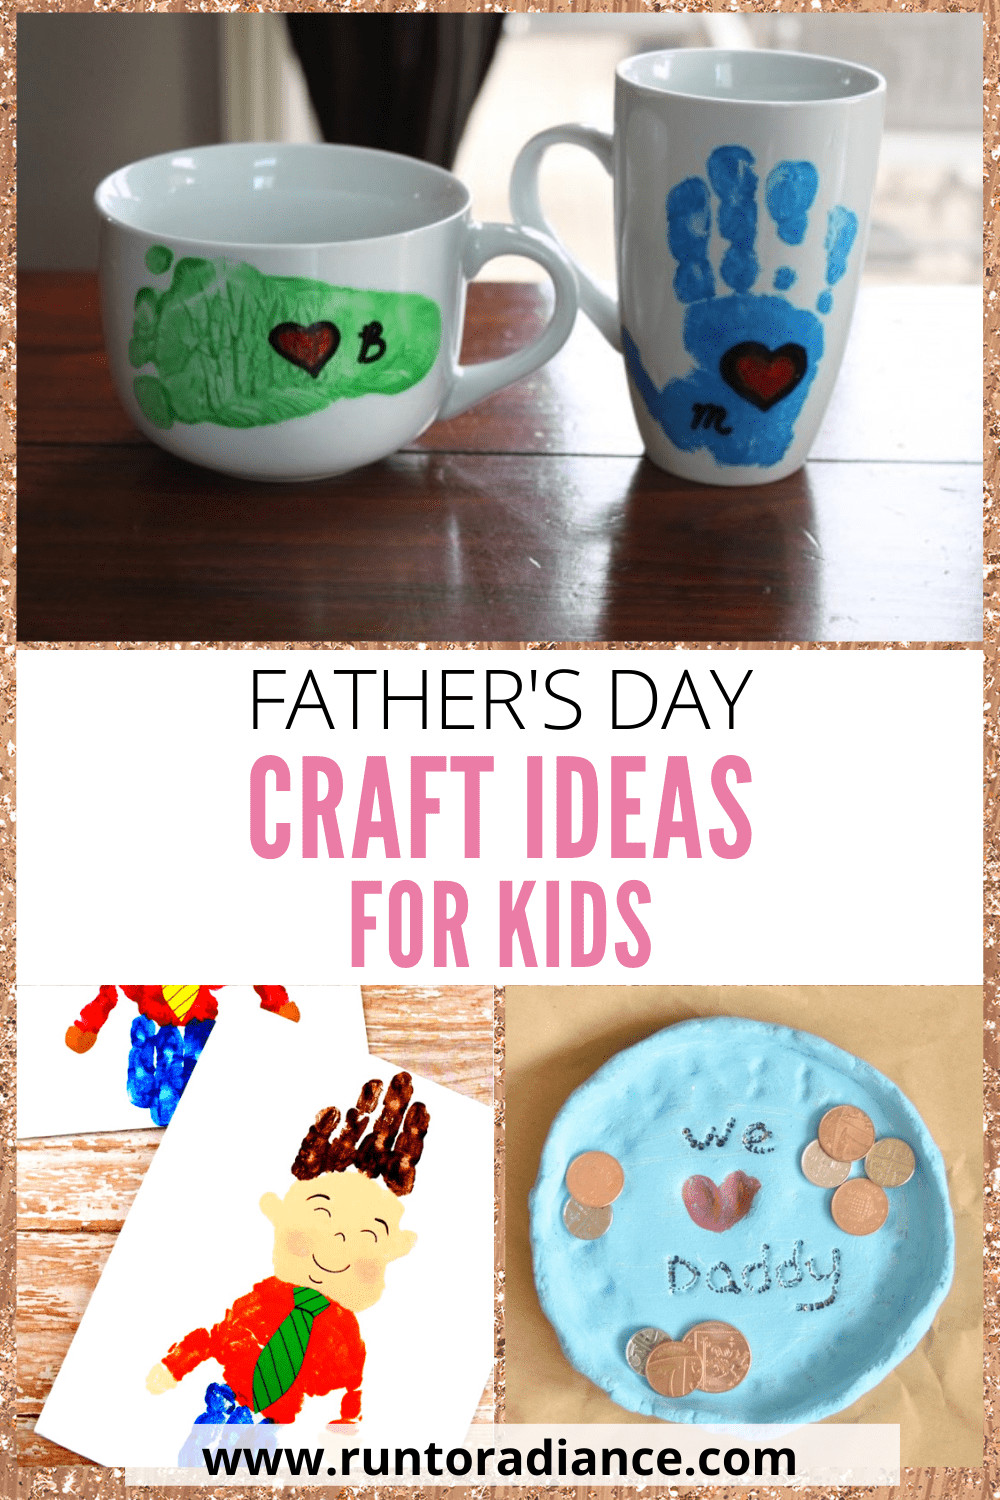 Gifts Set for Dad Men, Teen Boys, Husband, Father 15+items NEW Father's Day